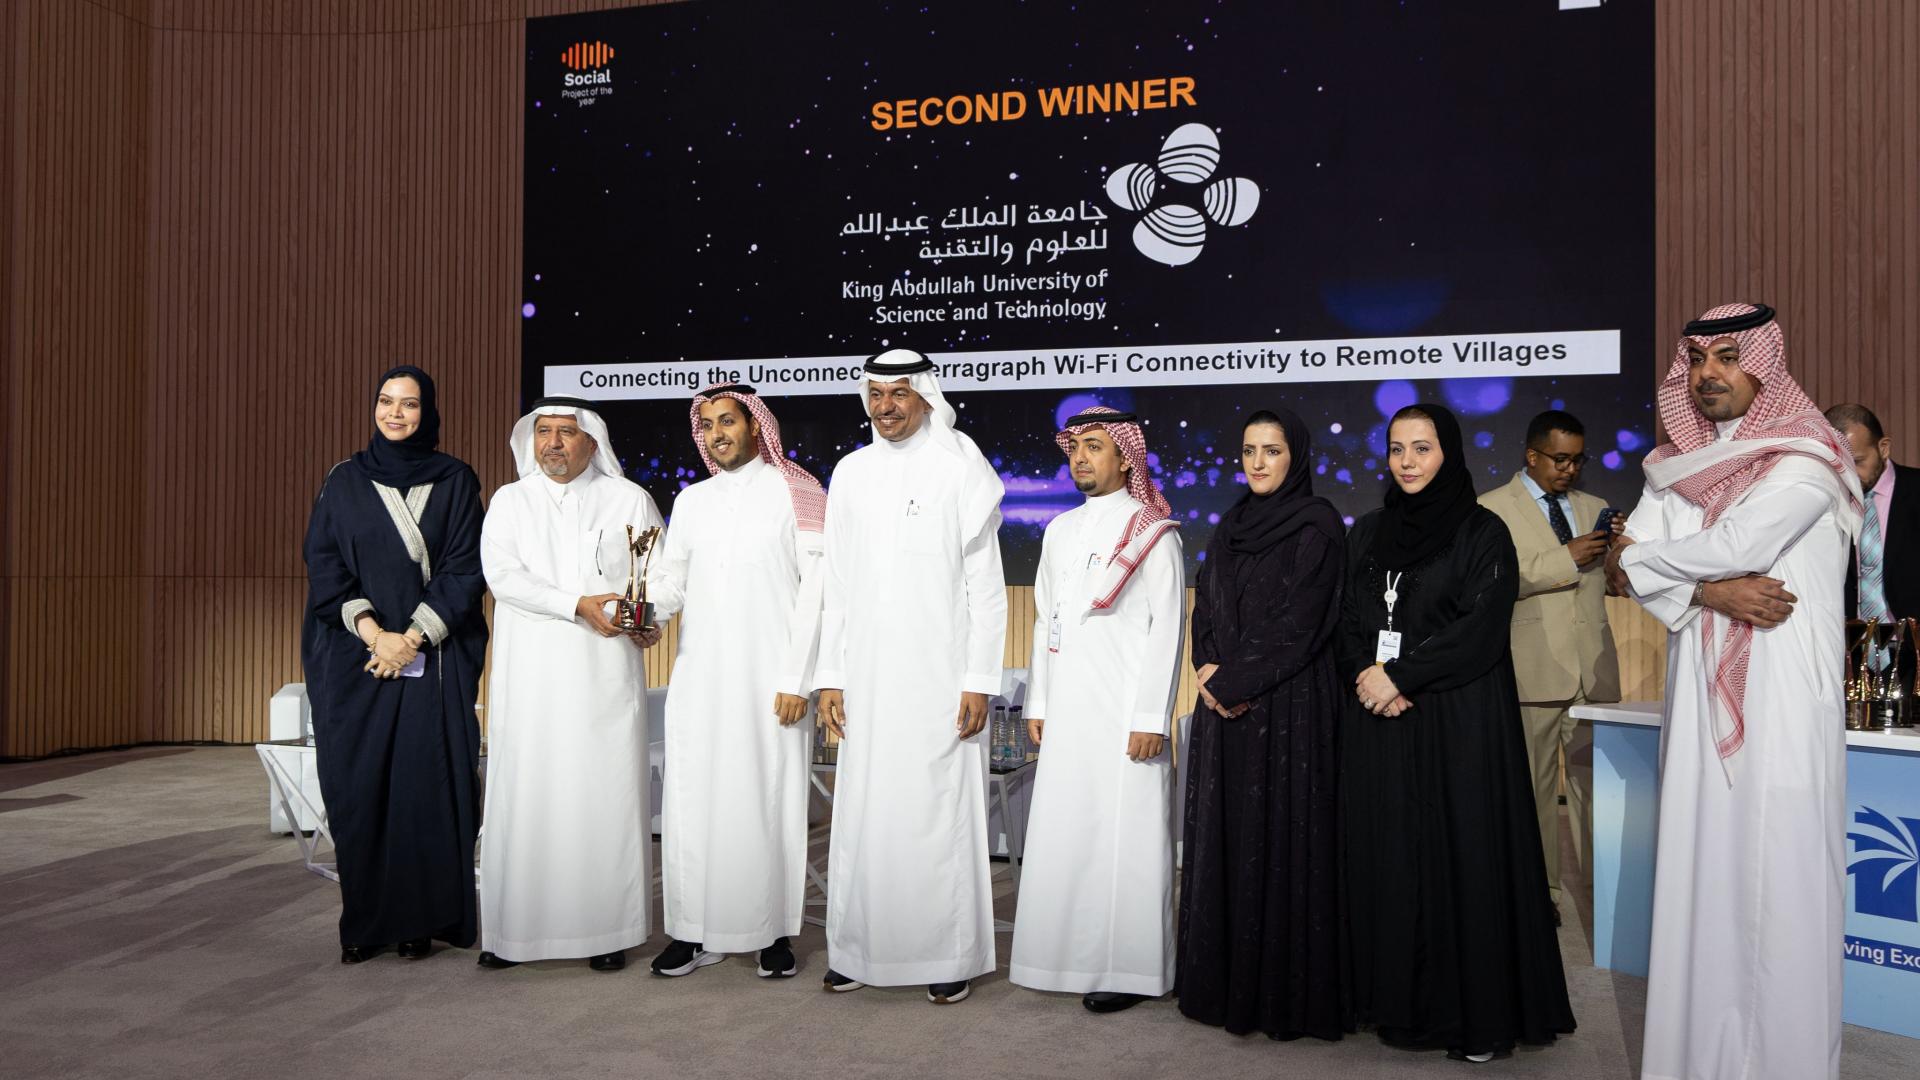 #KAUST won 2nd place at the Global Project Excellence Awards